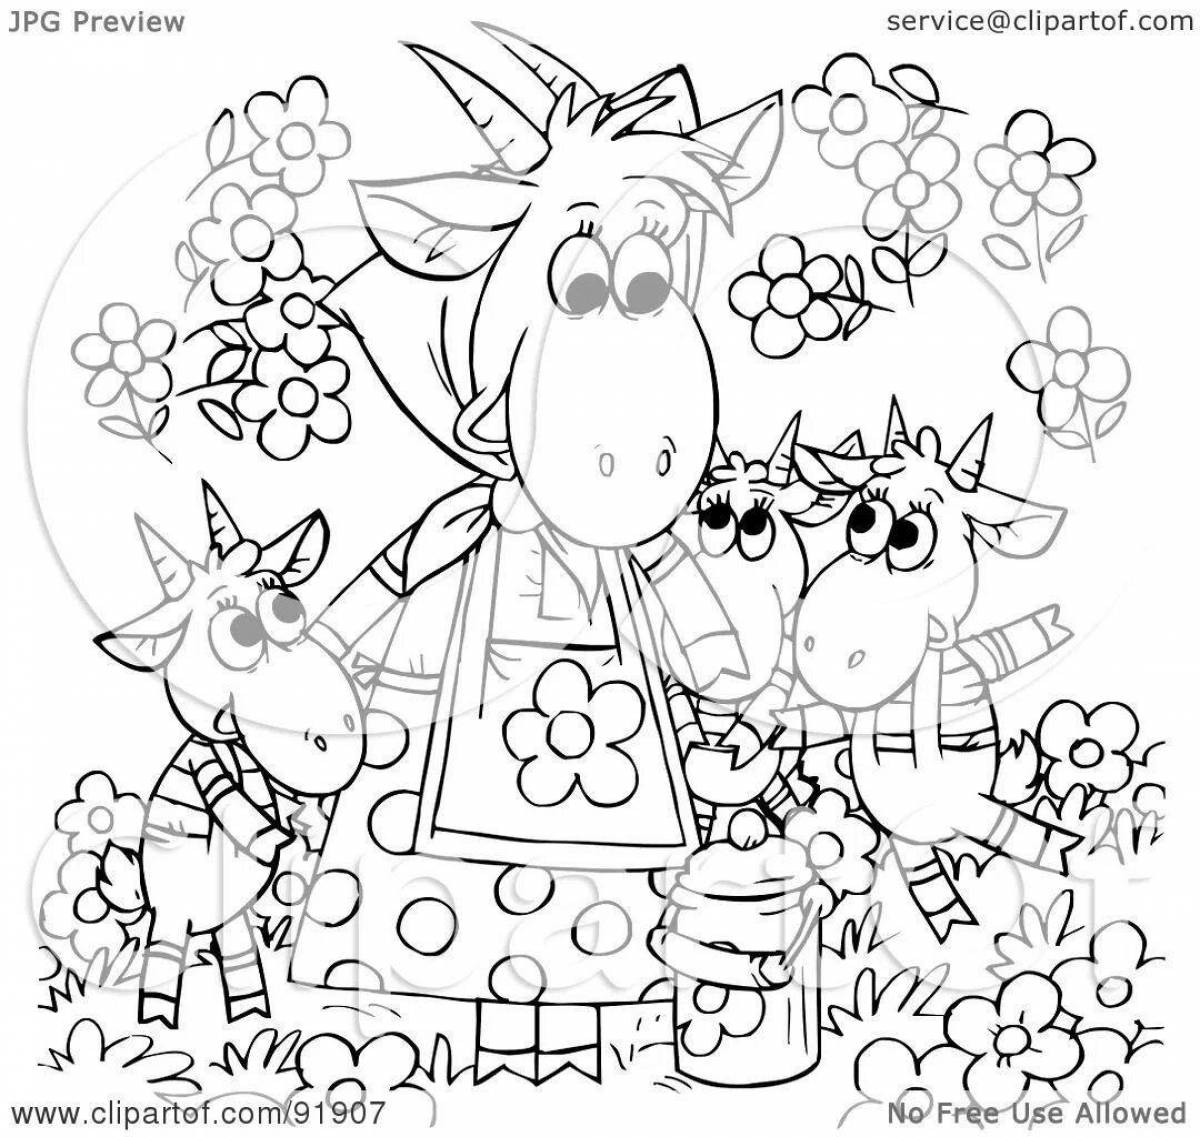 Live goat and seven kids coloring